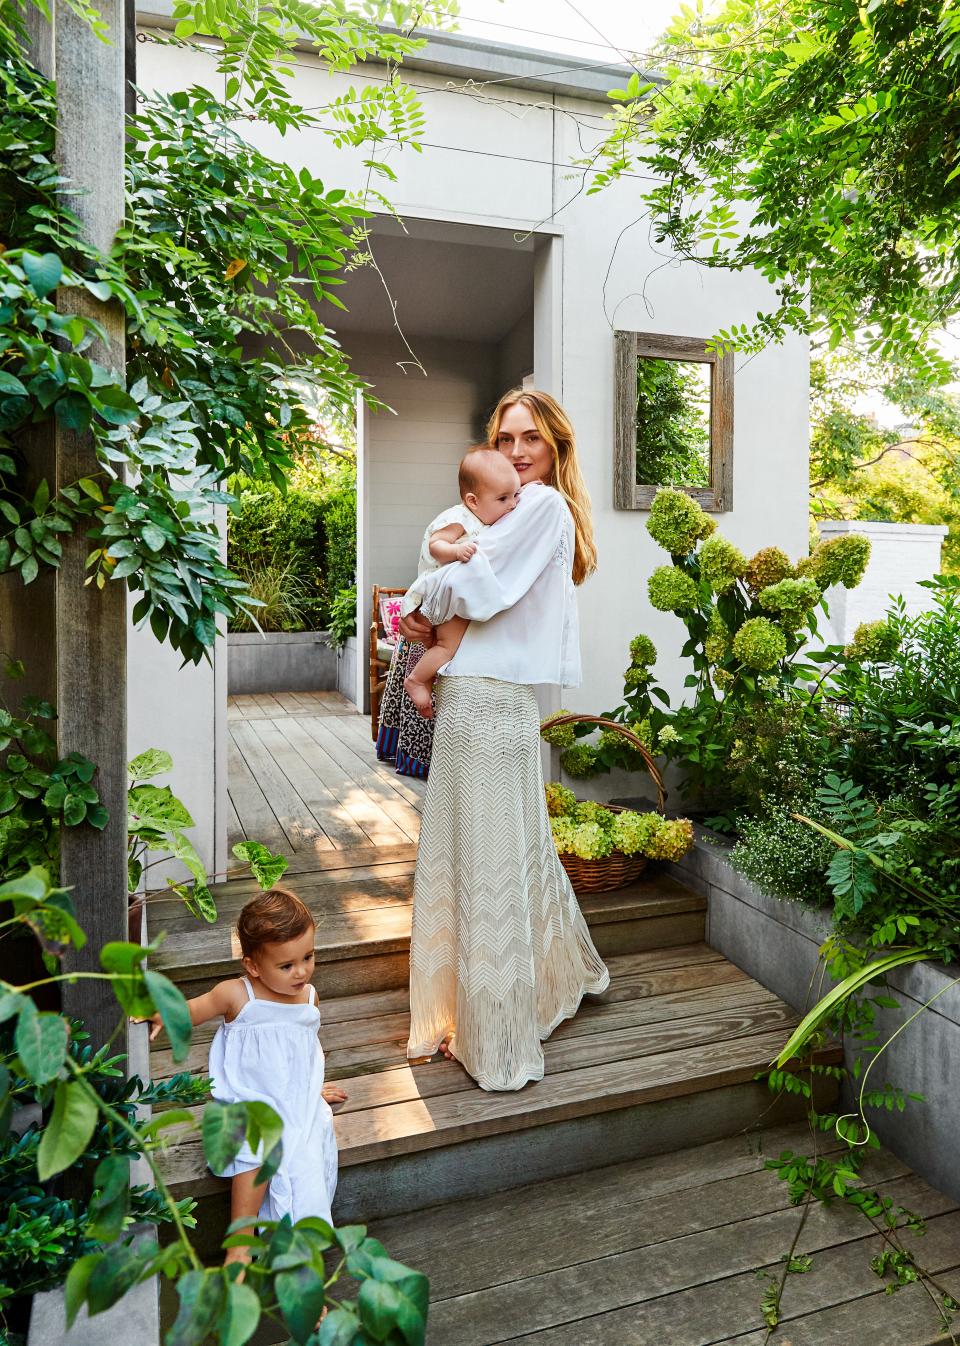 Grace Fuller Marroquin, with daughters Gloria and Flora, at their West Village town house. More than 50 plant varieties fill the beds, with an emphasis on New York species.